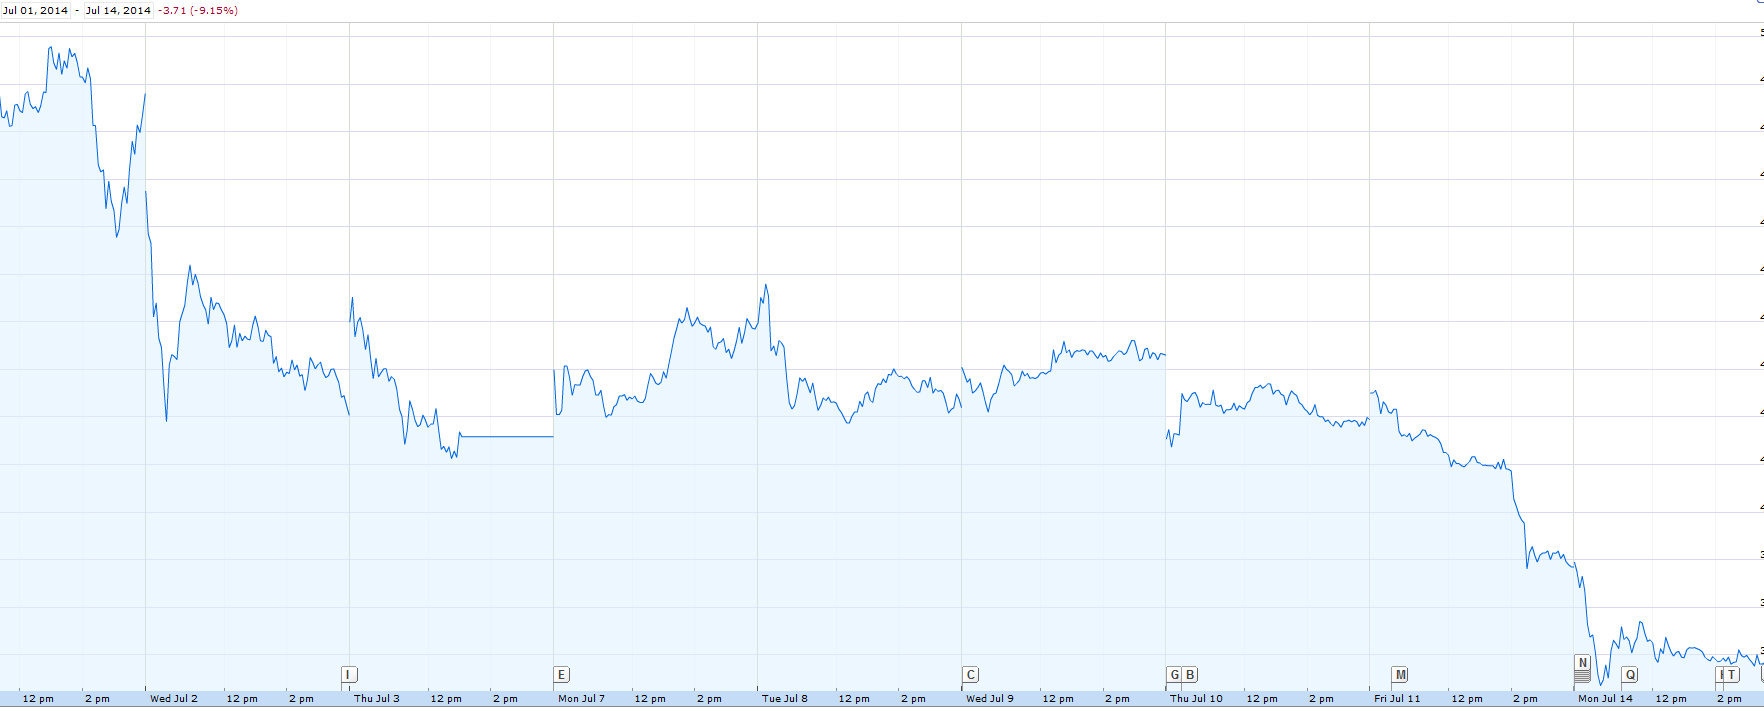 GoPro Stock Prices Heading Downhill